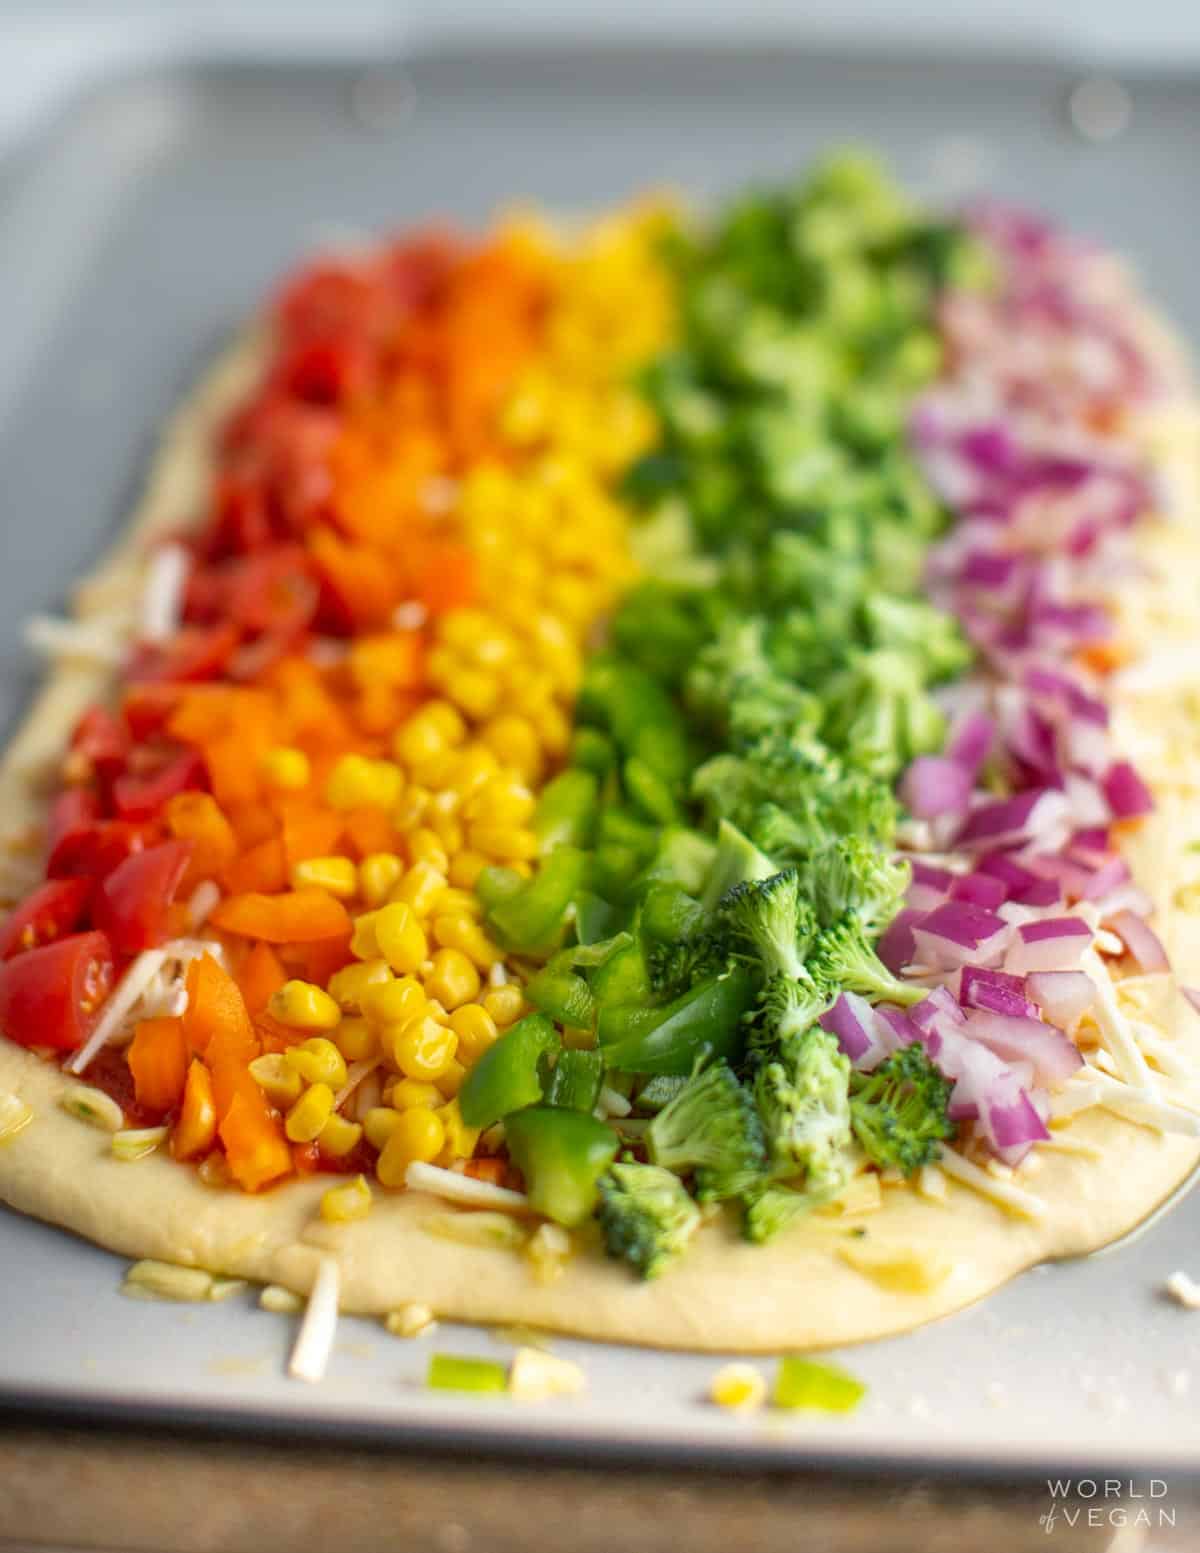 Photo of World of Vegan's rainbow pizza on a baking sheet before baking it in the oven. 